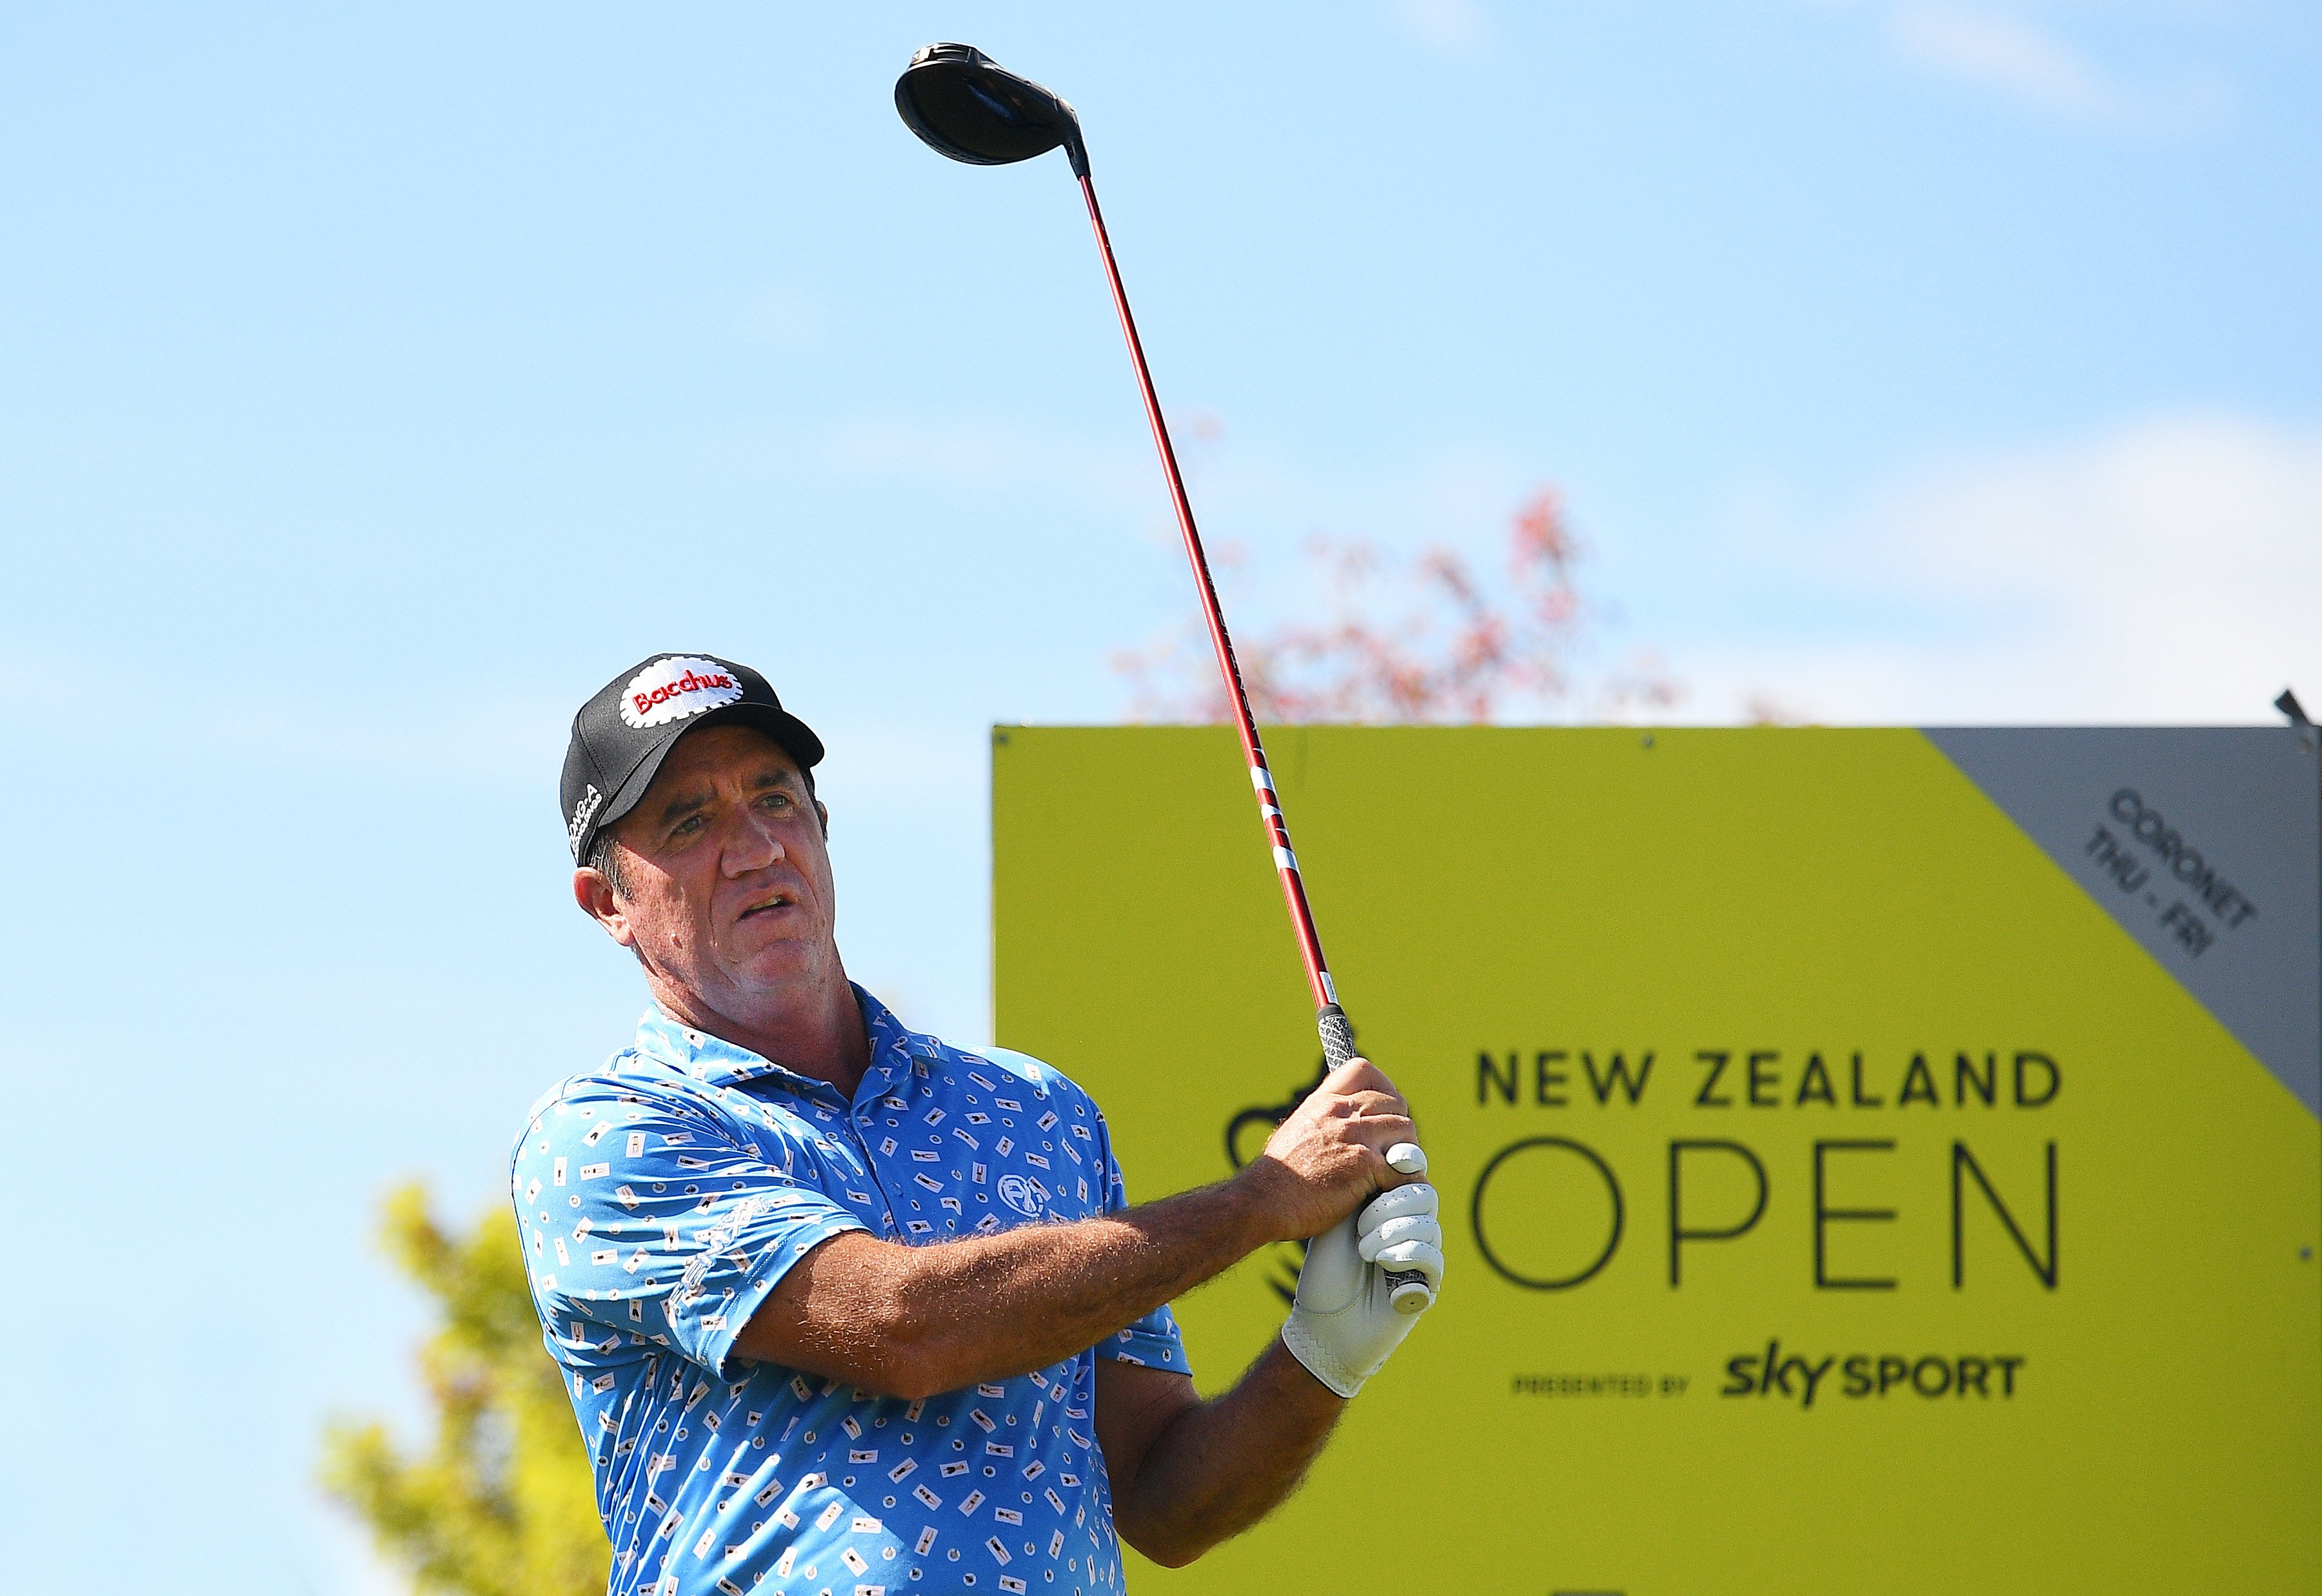 Scott Hend watches a tee shot during the second round of the New Zealand Open. Photo: Asian Tour